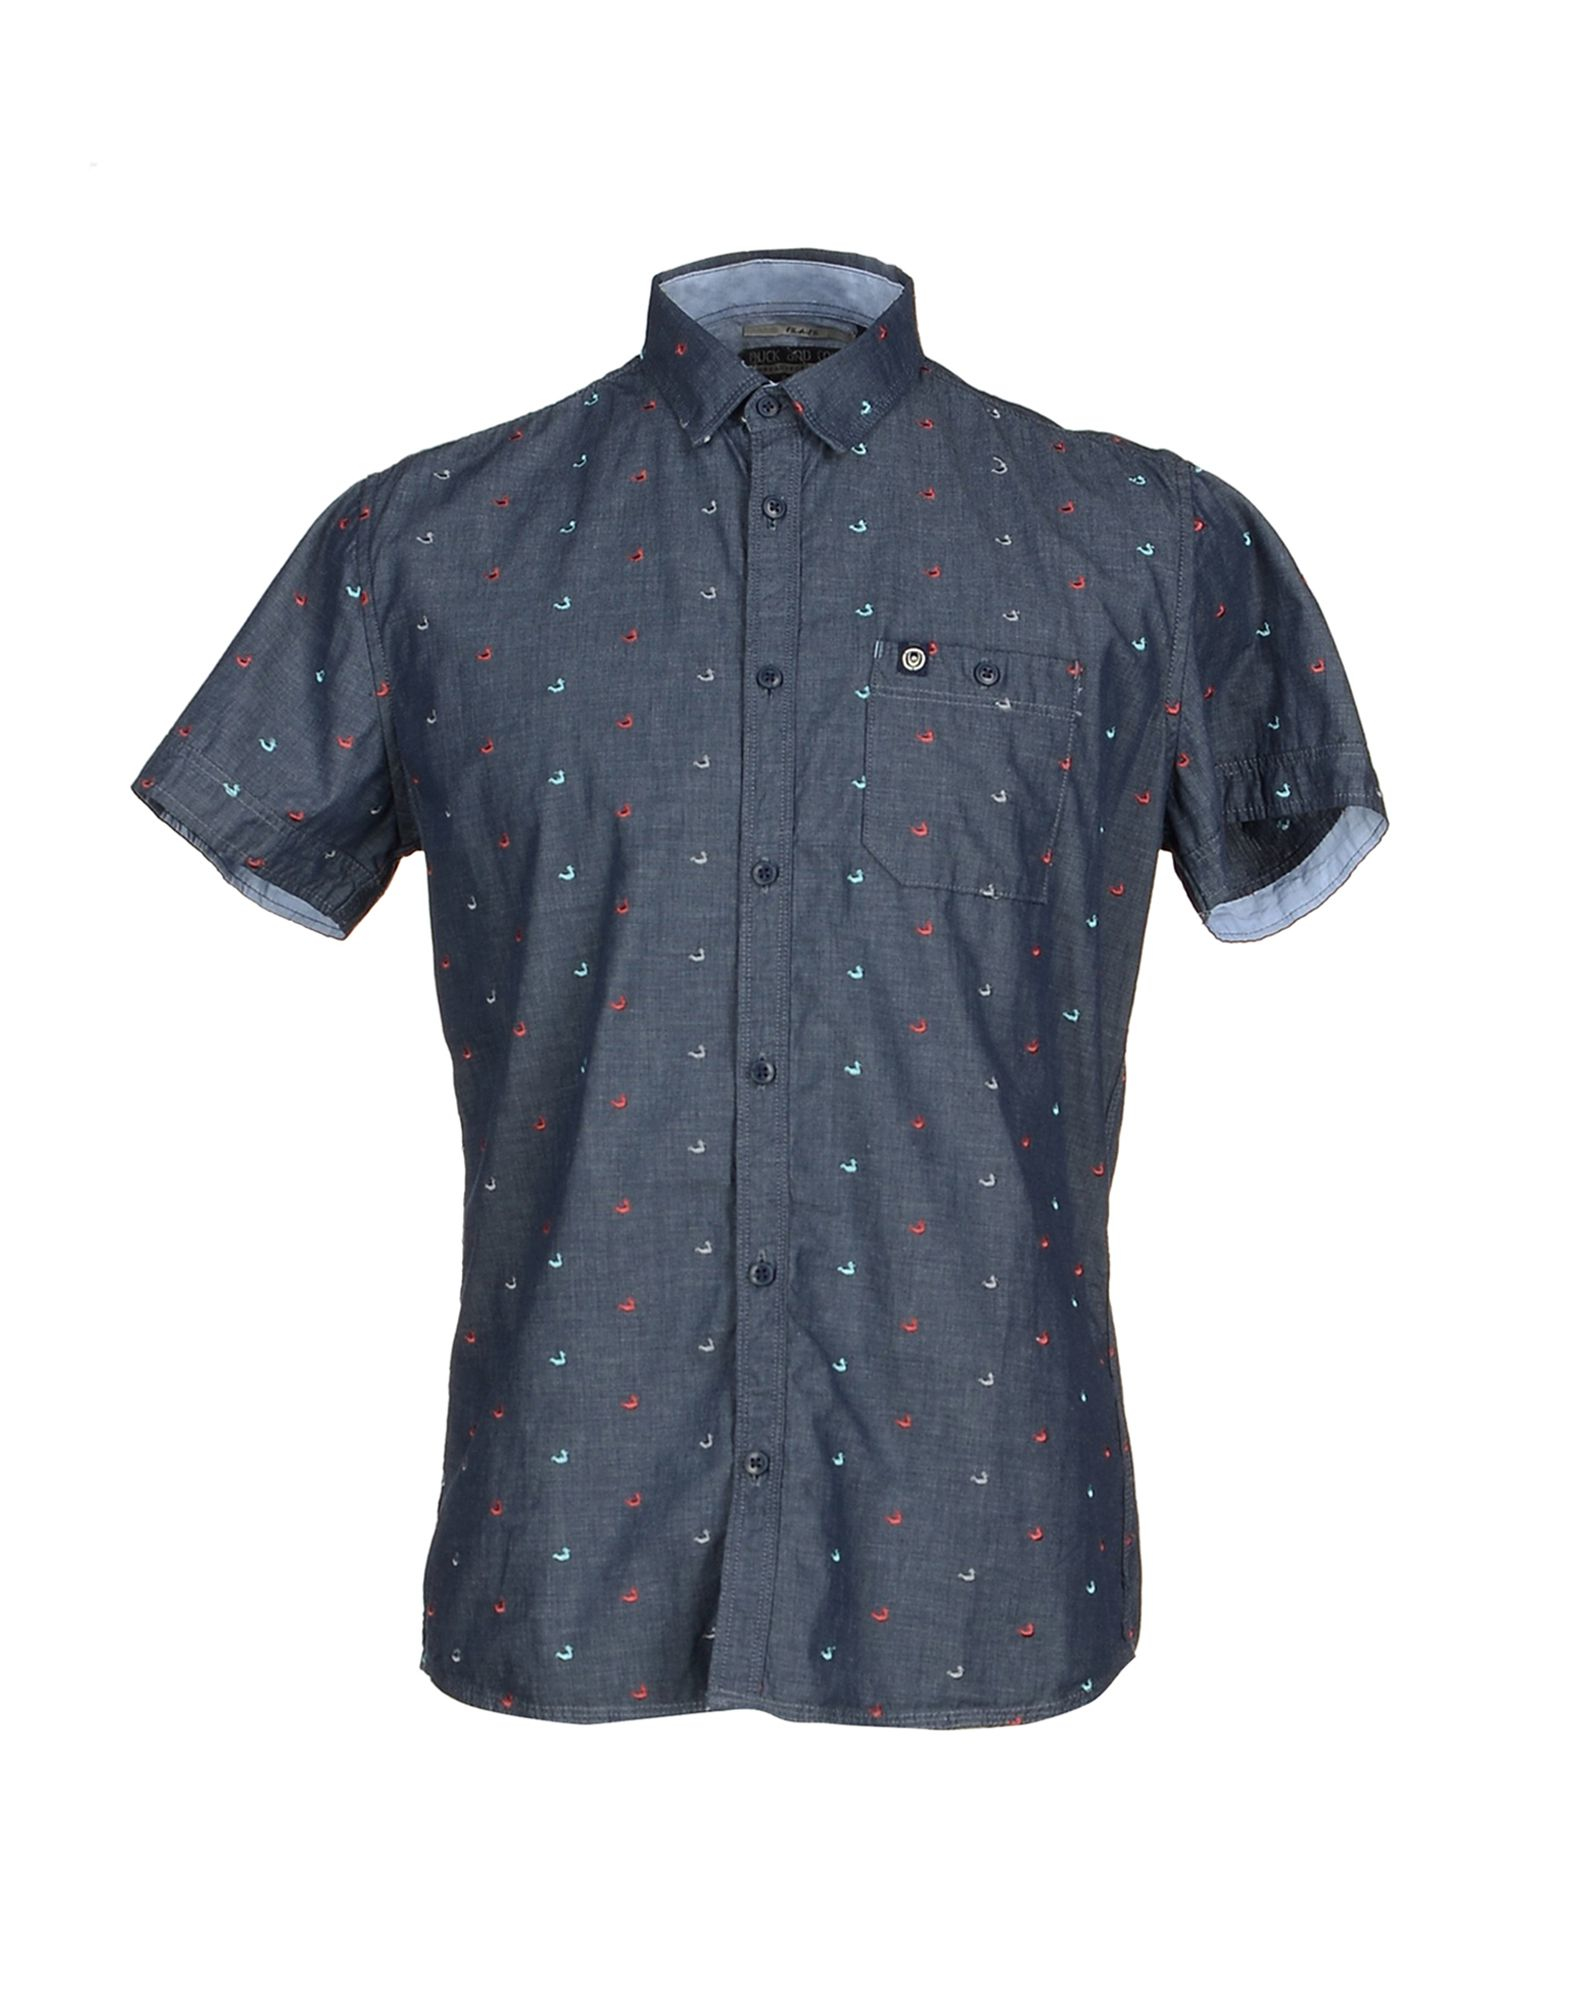 Lyst - Duck and cover Shirt in Blue for Men